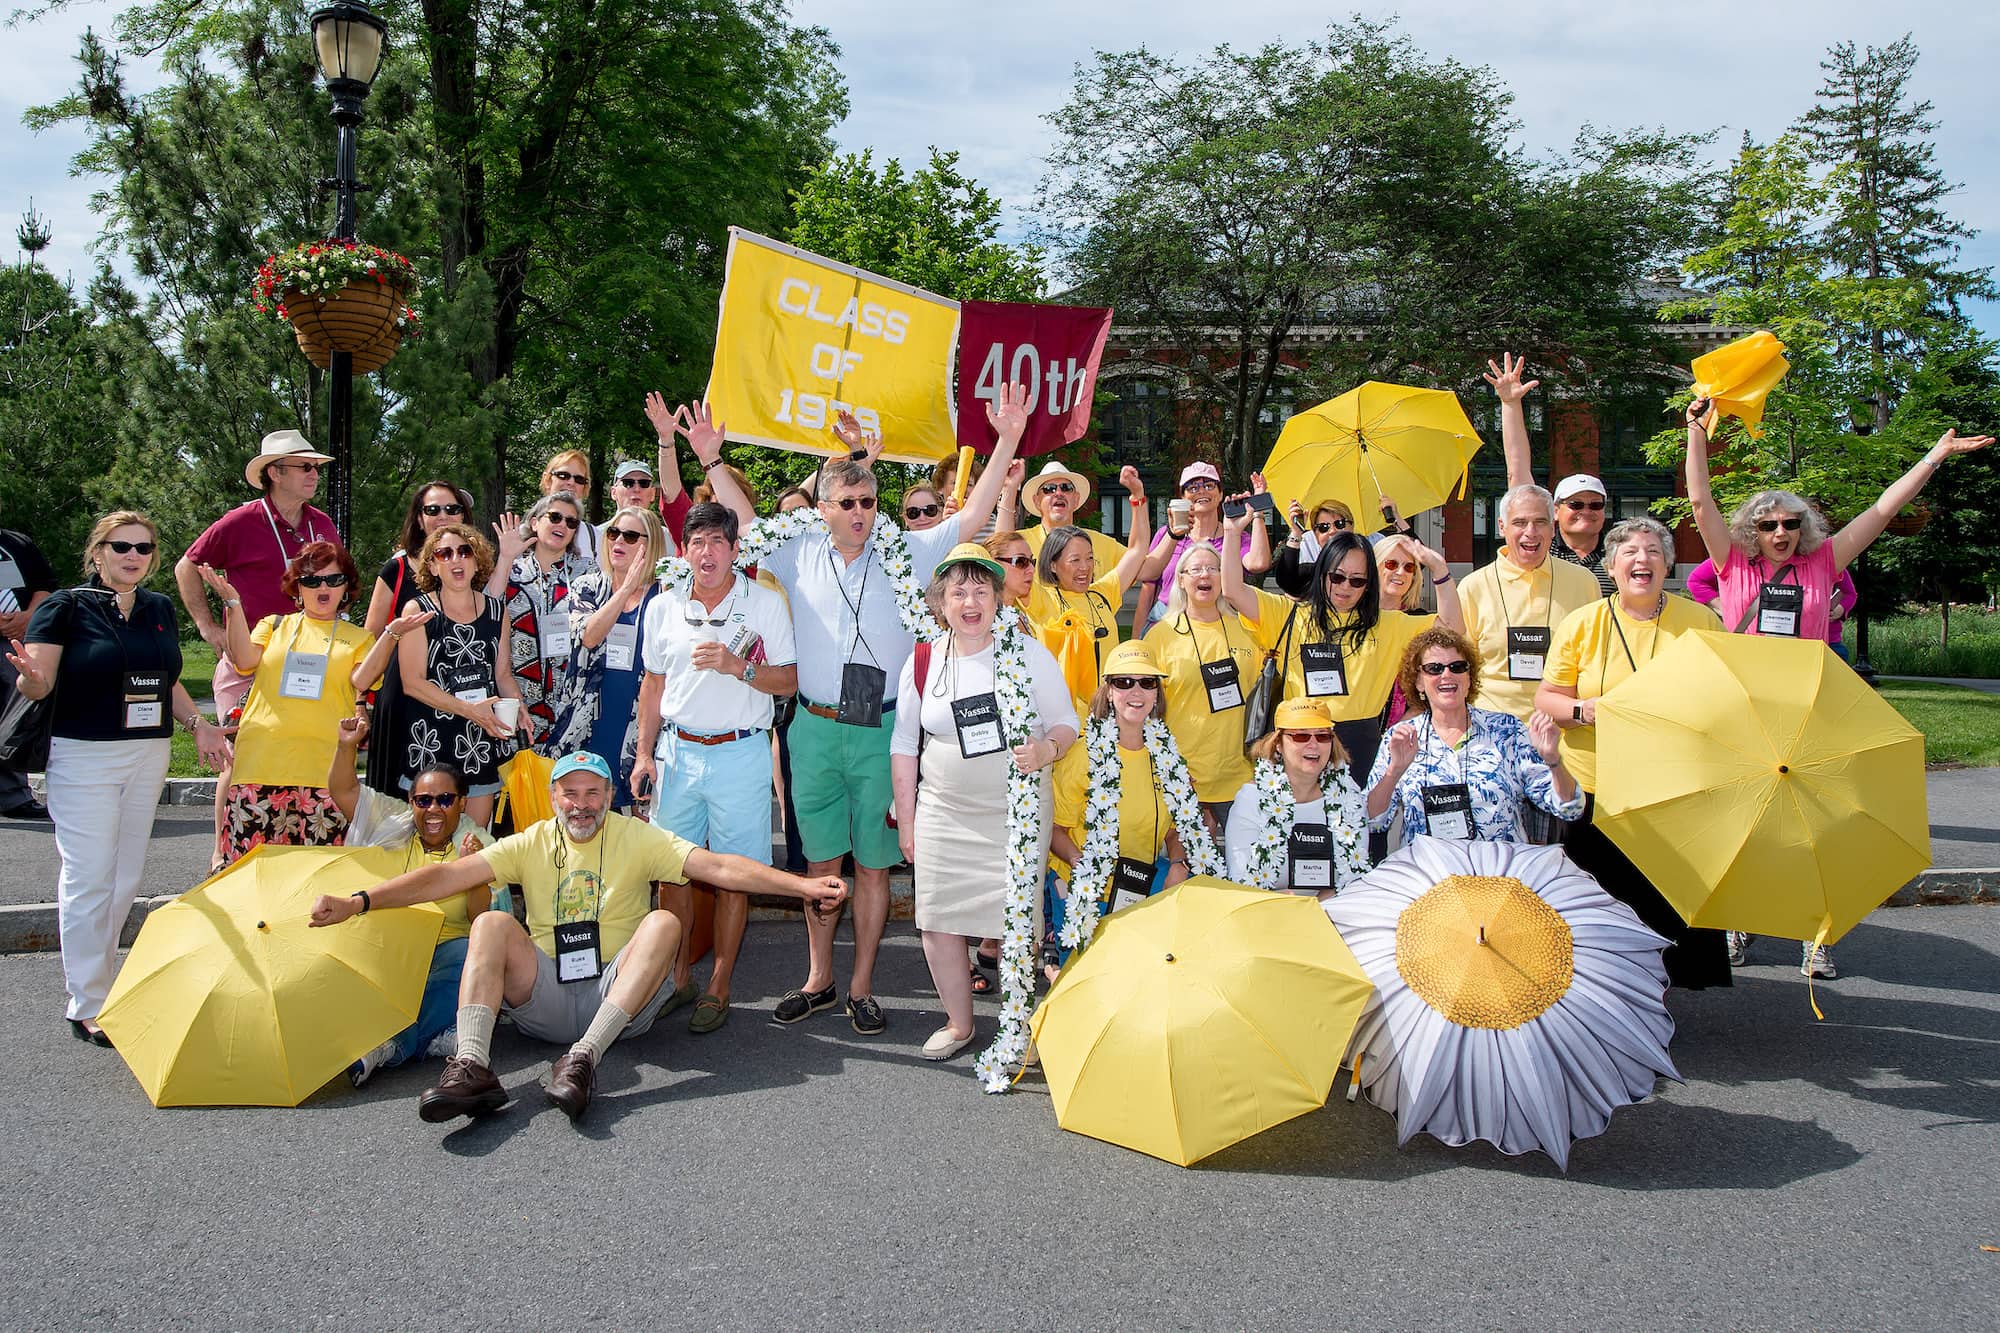 A large group of people are holding or sitting under bright yellow umbrellas or banners, wearing casual summer attire, cheering at the viewer.